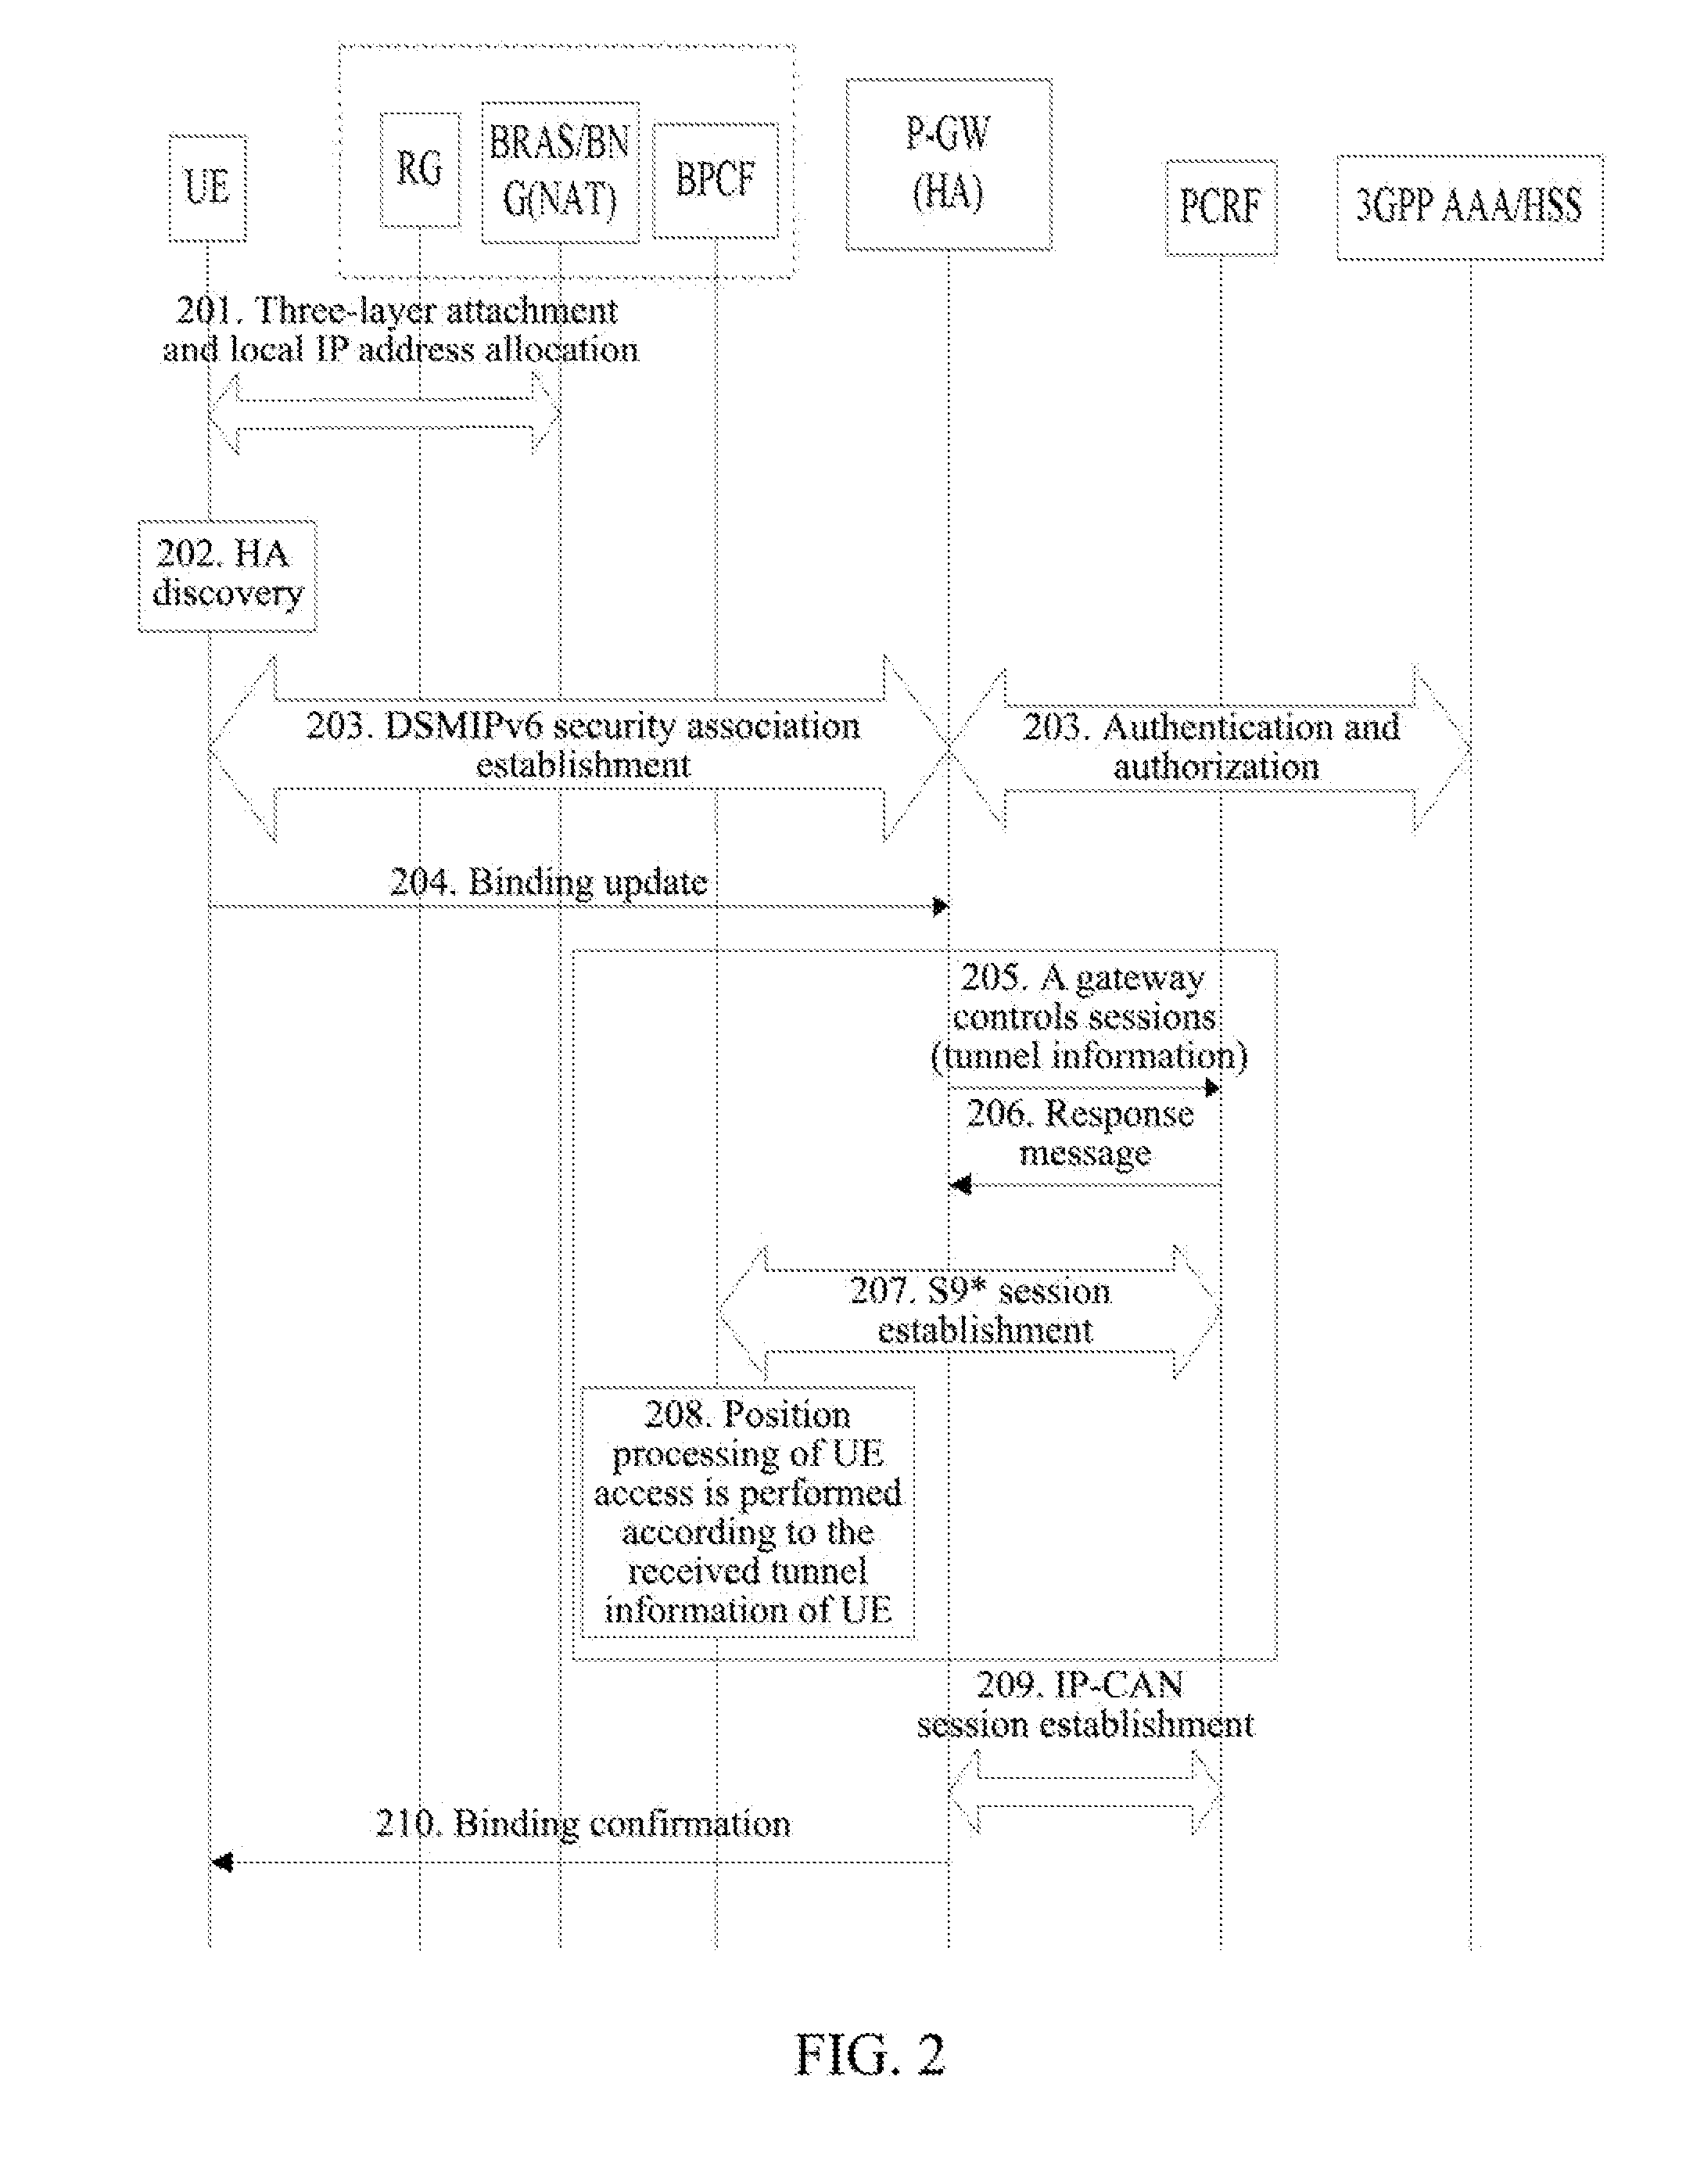 Method for Policy and Charging Rules Function (PCRF) Informing Centralized Deployment Functional Architecture (BPCF) of User Equipment Access Information